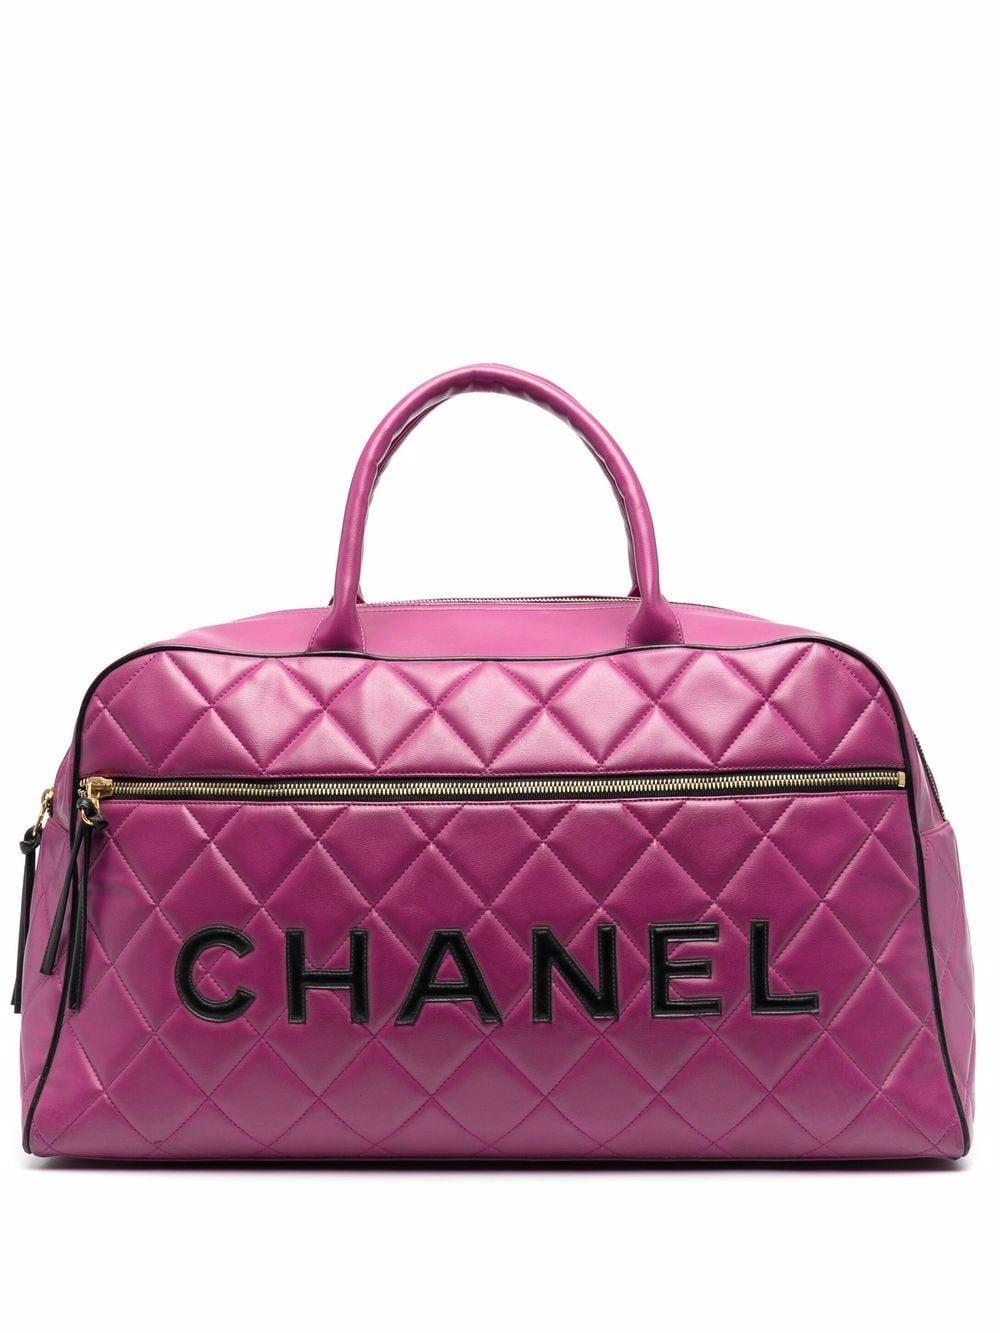 1995 Chanel pink quilted BOSTON bowling tote bag featuring a pink chevron quilted,  front black leather logo, top handles.
Circa 1995. 
Please note that vintage items are not new and therefore might have minor imperfections. 
Made in France
In good